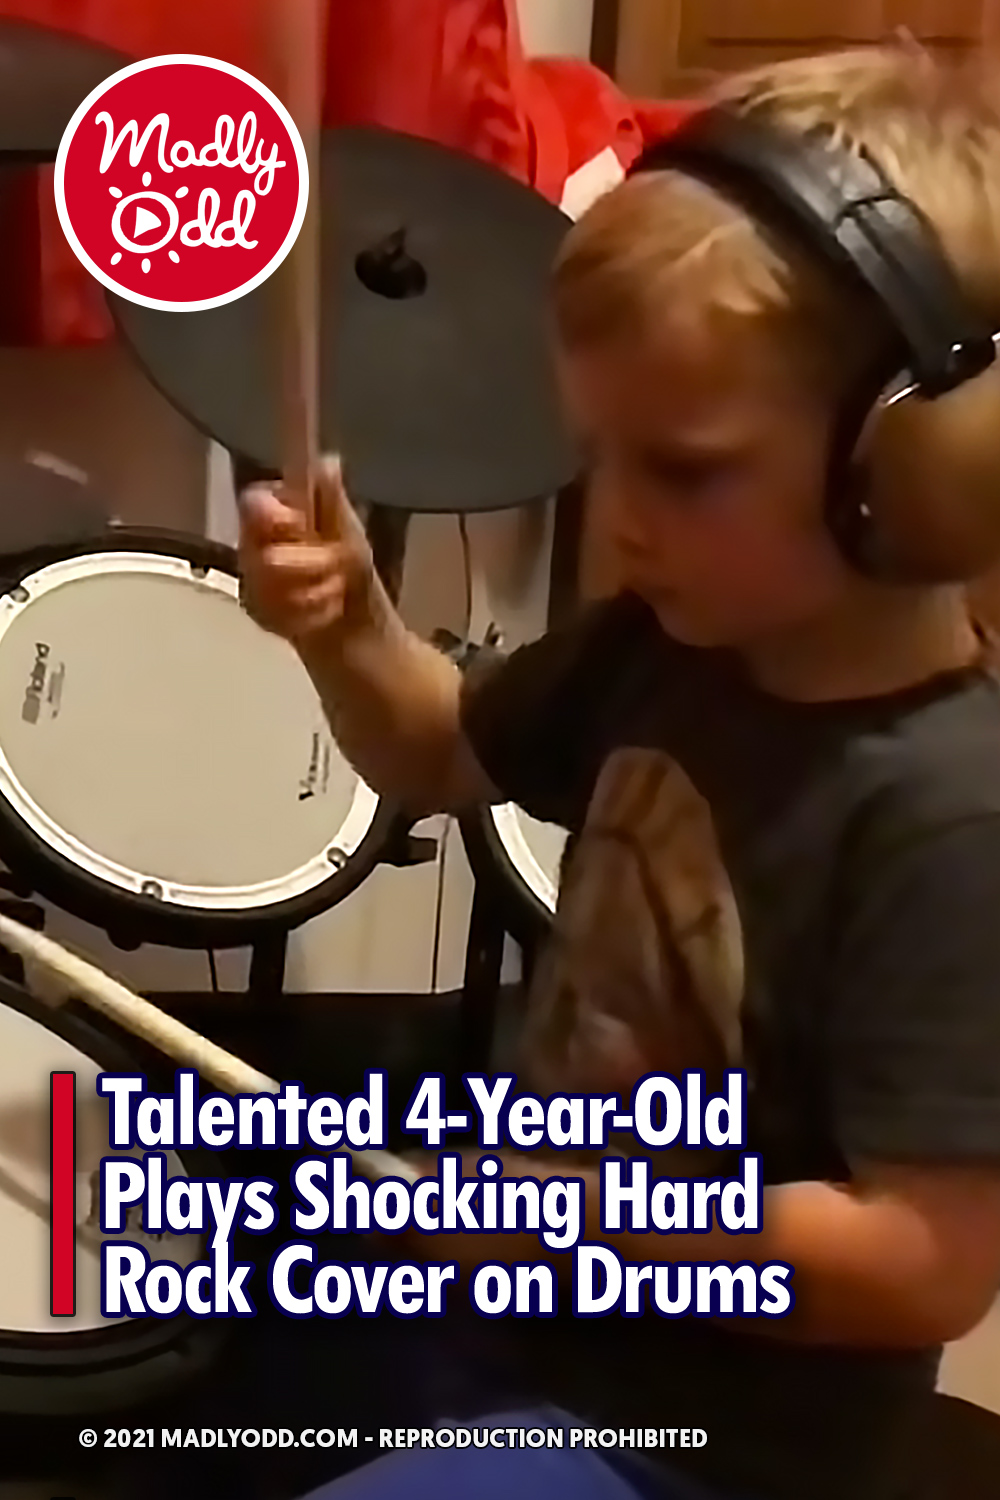 Talented 4-Year-Old Plays Shocking Hard Rock Cover on Drums